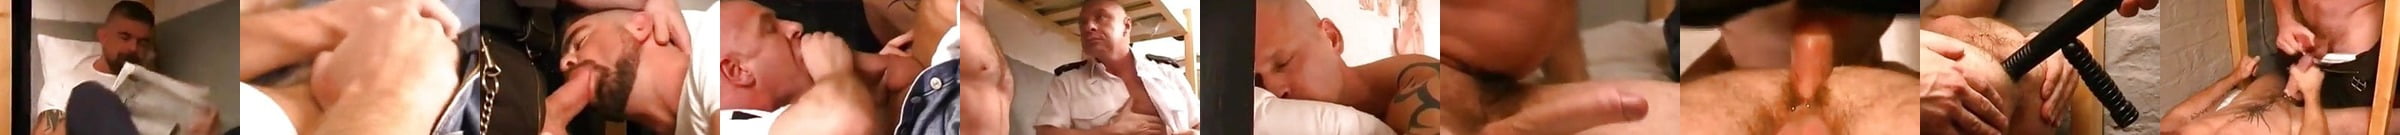 Sucking And Eating Cum Of Hairy Moustache Daddy Gay Xhamster 5944